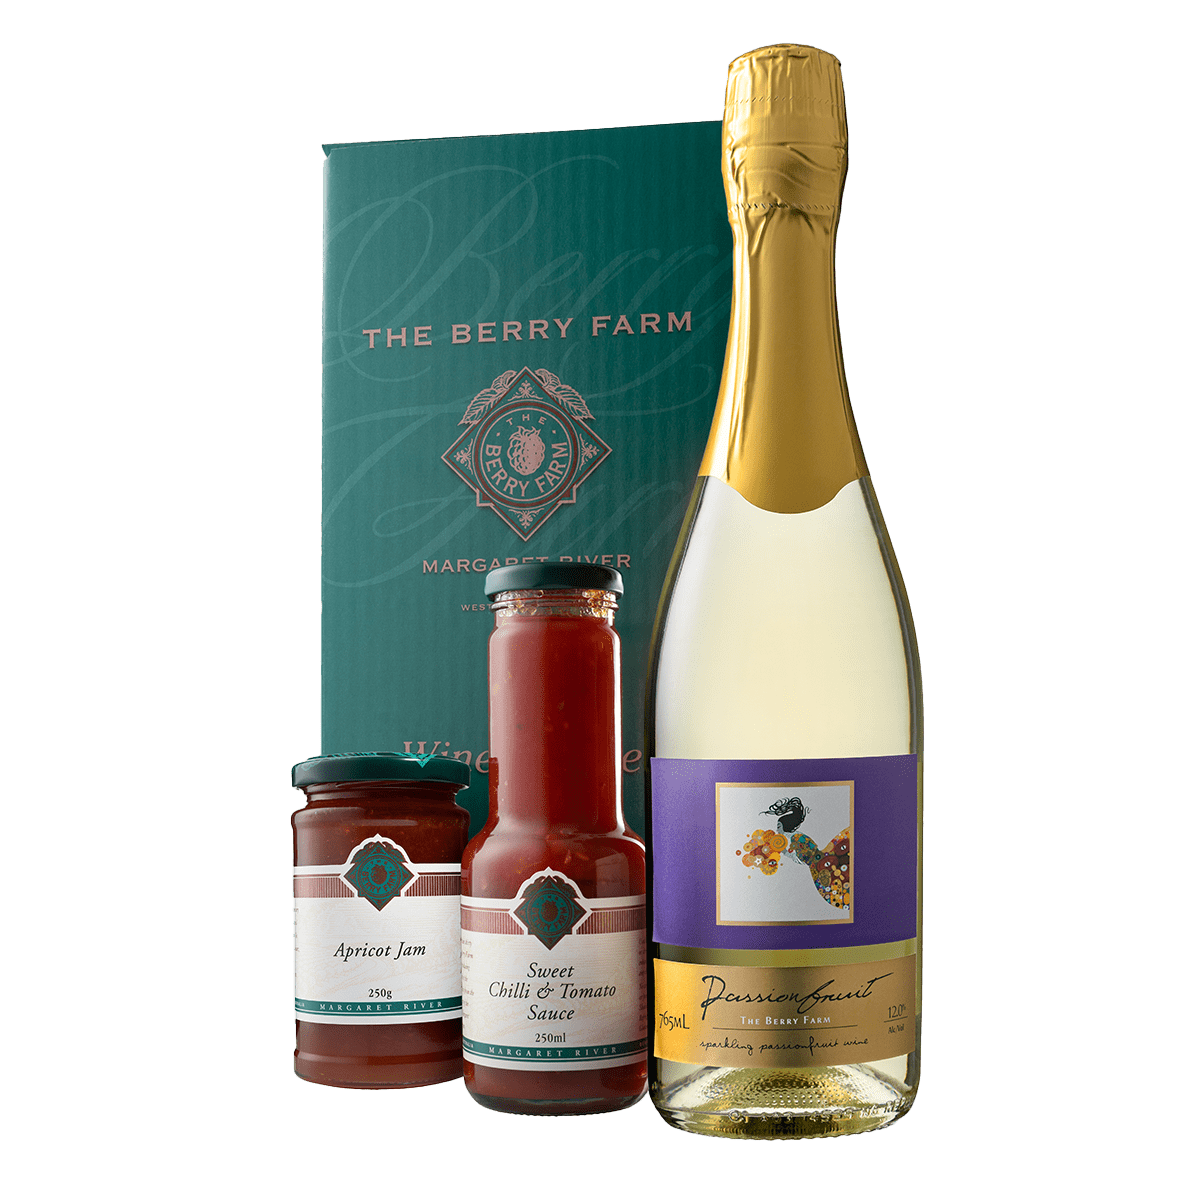 A bottle of Passionfruit Sparkling Wine, Sweet Chilli & Tomato Sauce and Apricot Jam